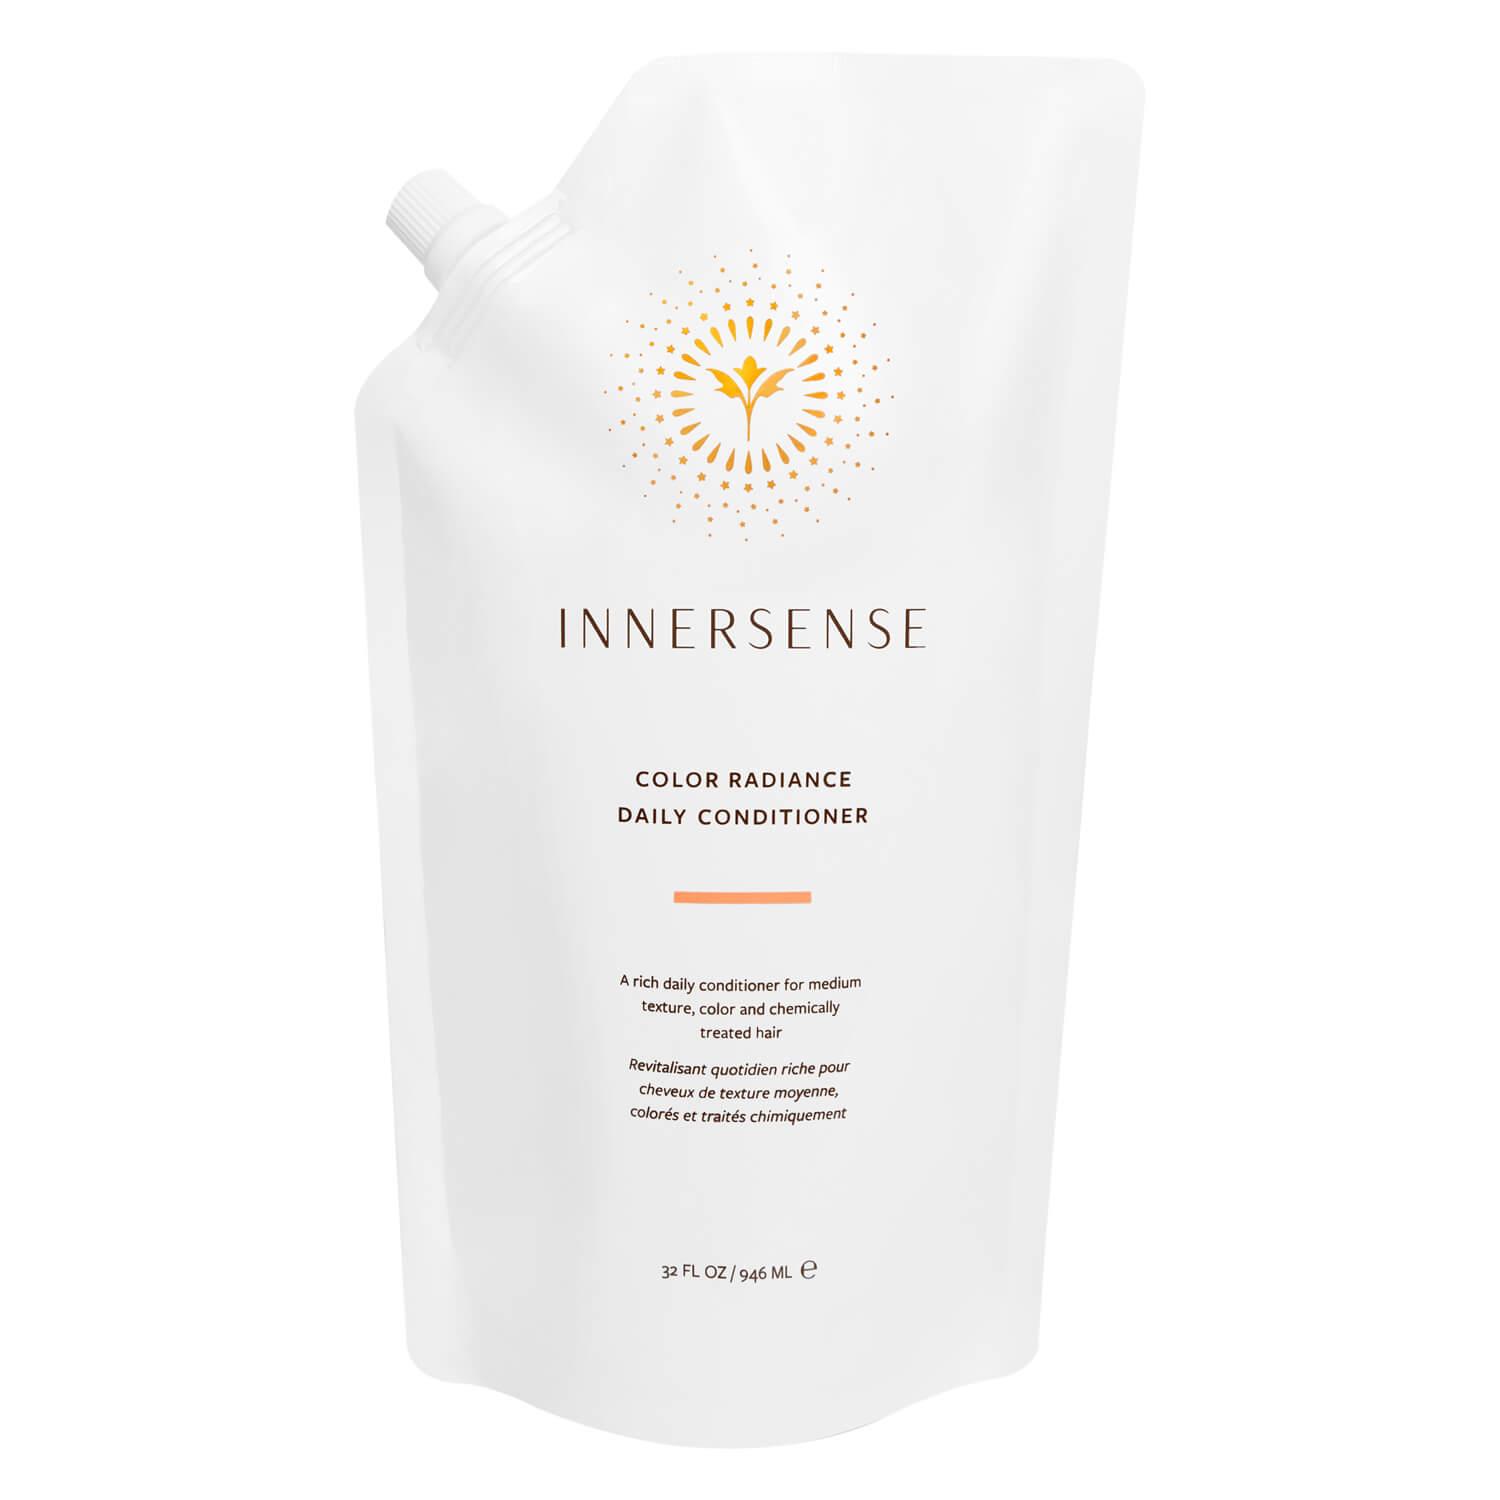 Innersense - Color Radiance Daily Conditioner Refill